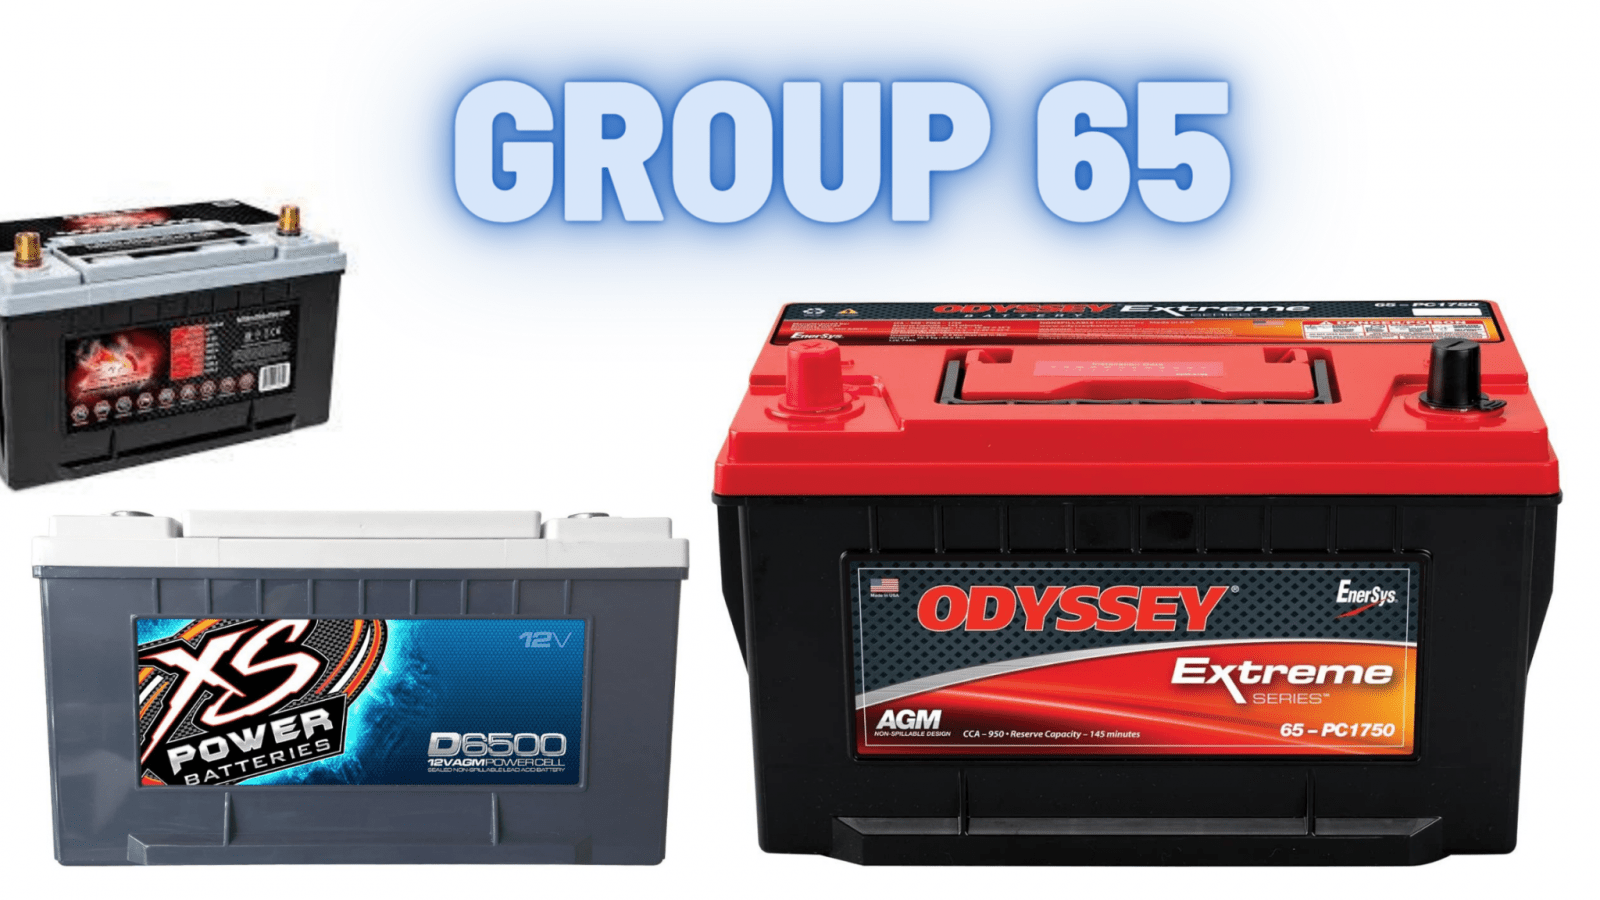 Best Group 65 Battery You Can Buy in 2021